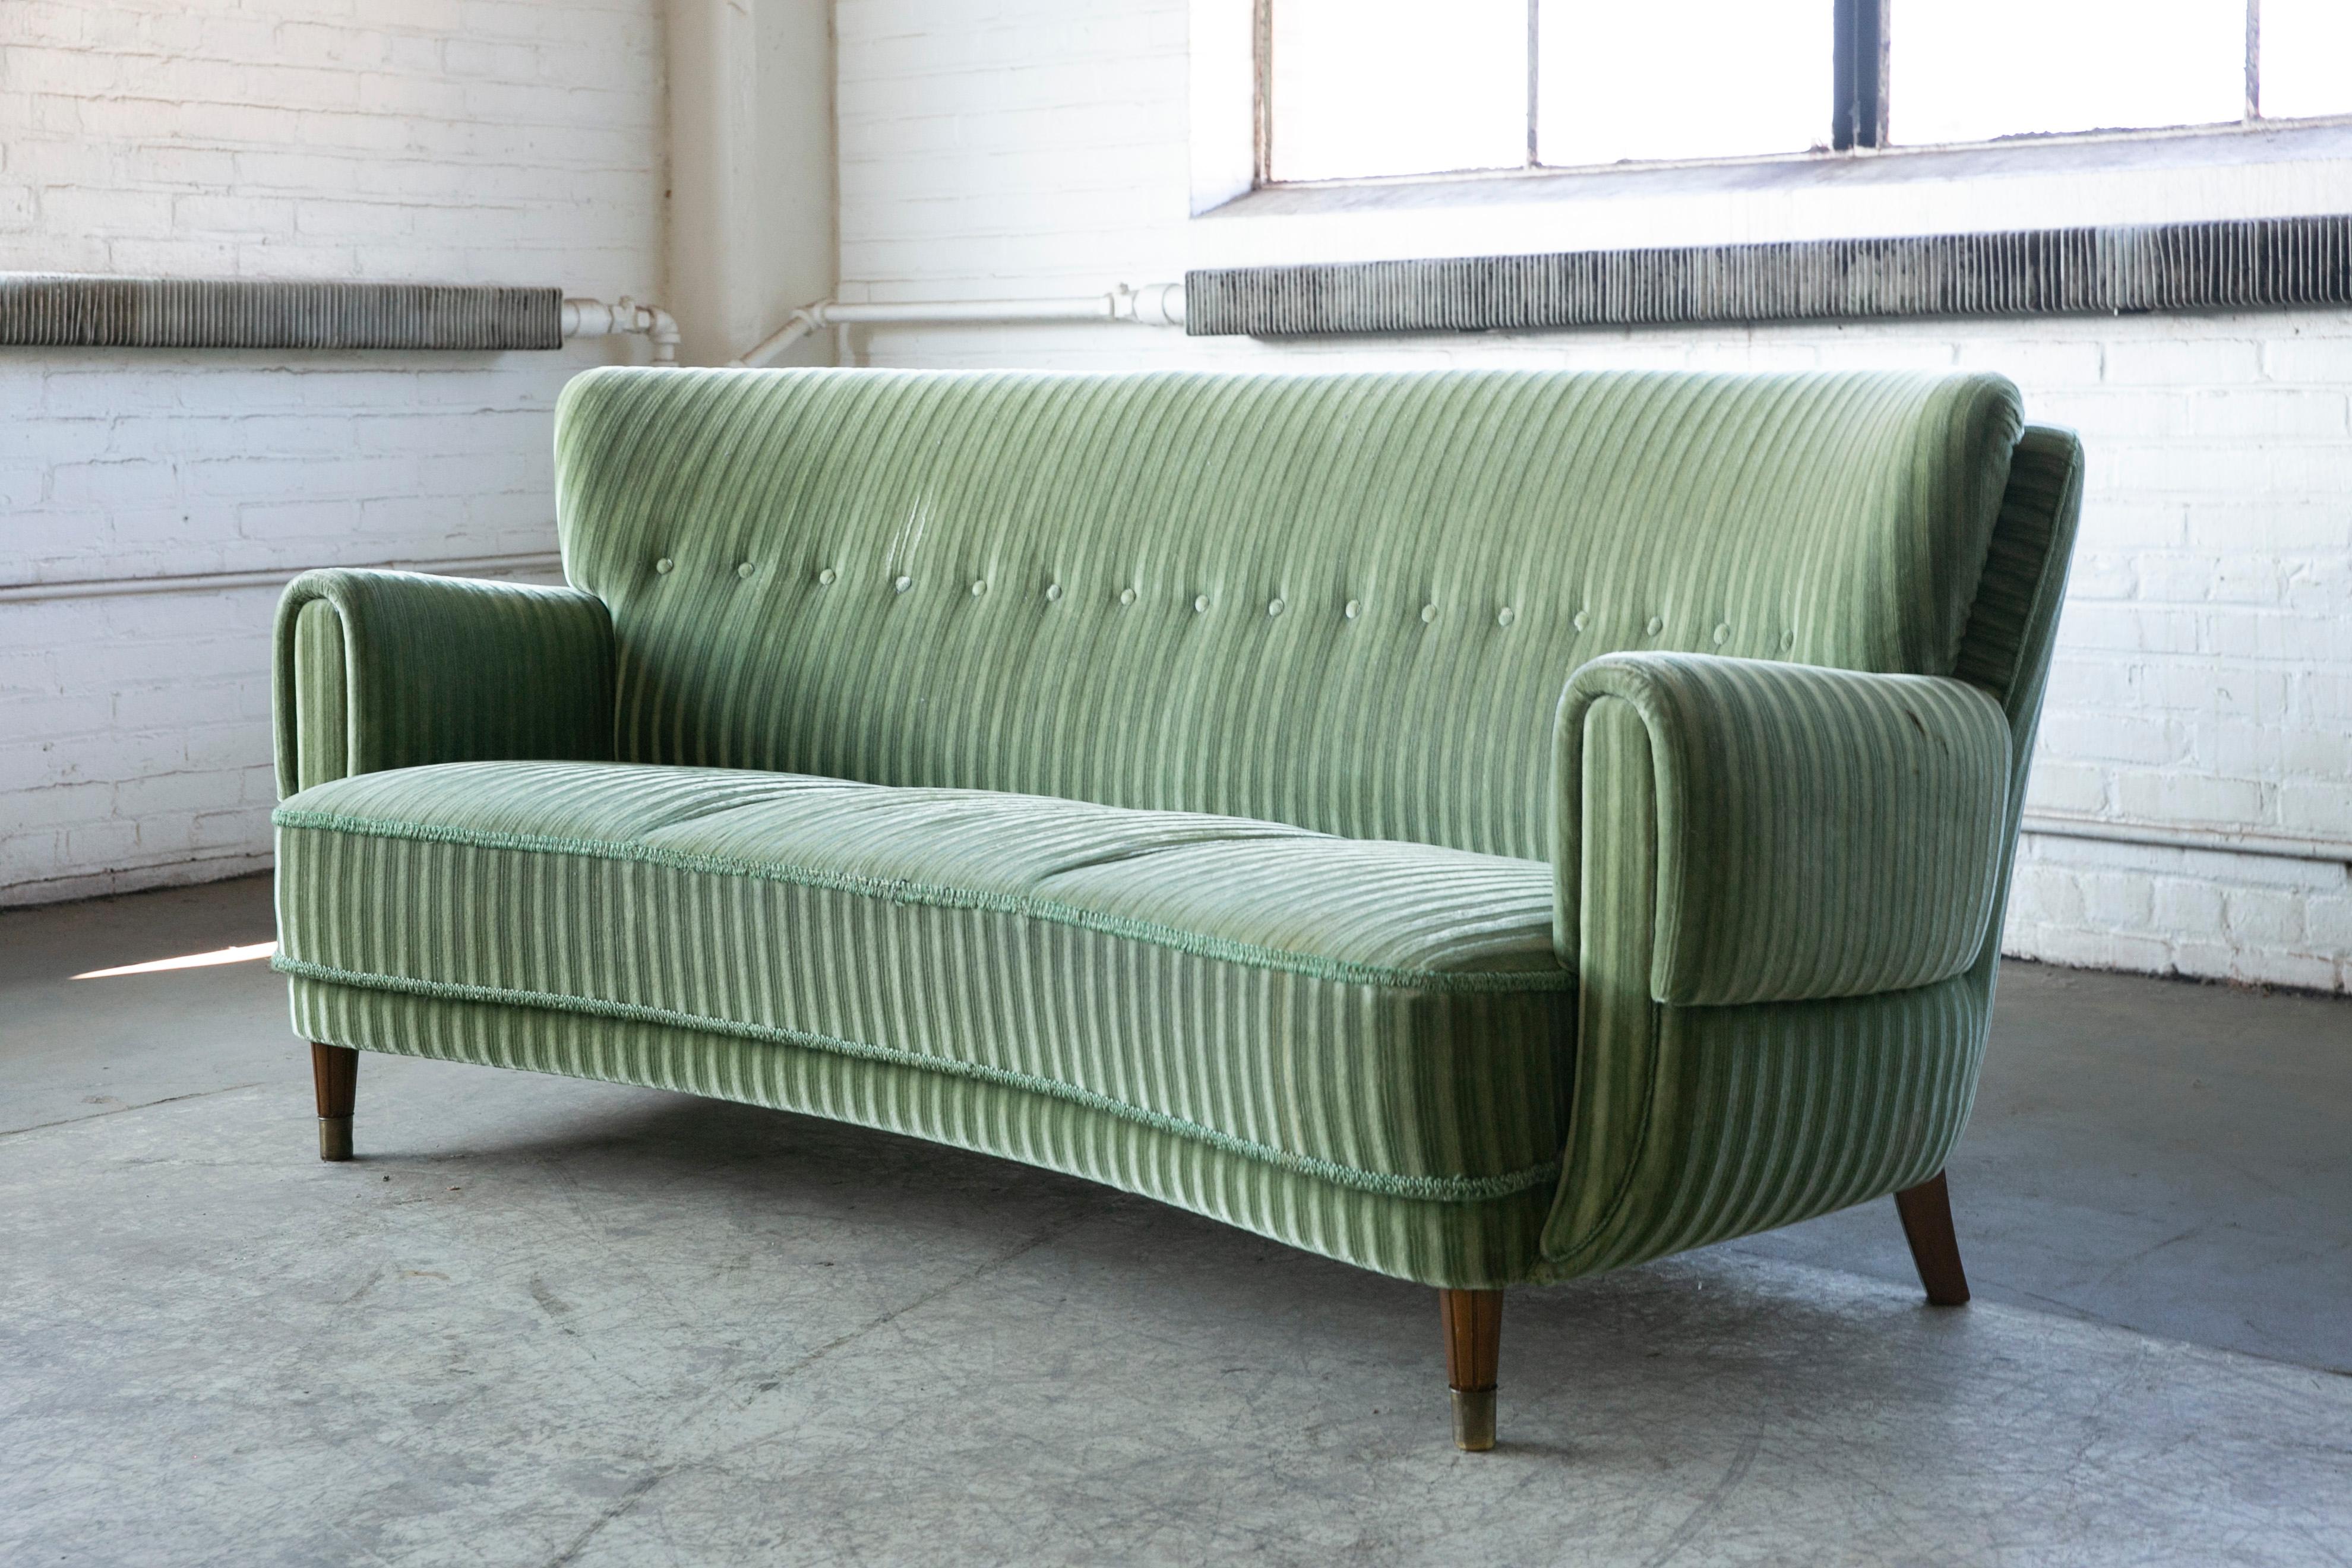 Mid-Century Modern Danish Ca. 1950 Curved Sofa in Green Mohair and Brass Capped Legs